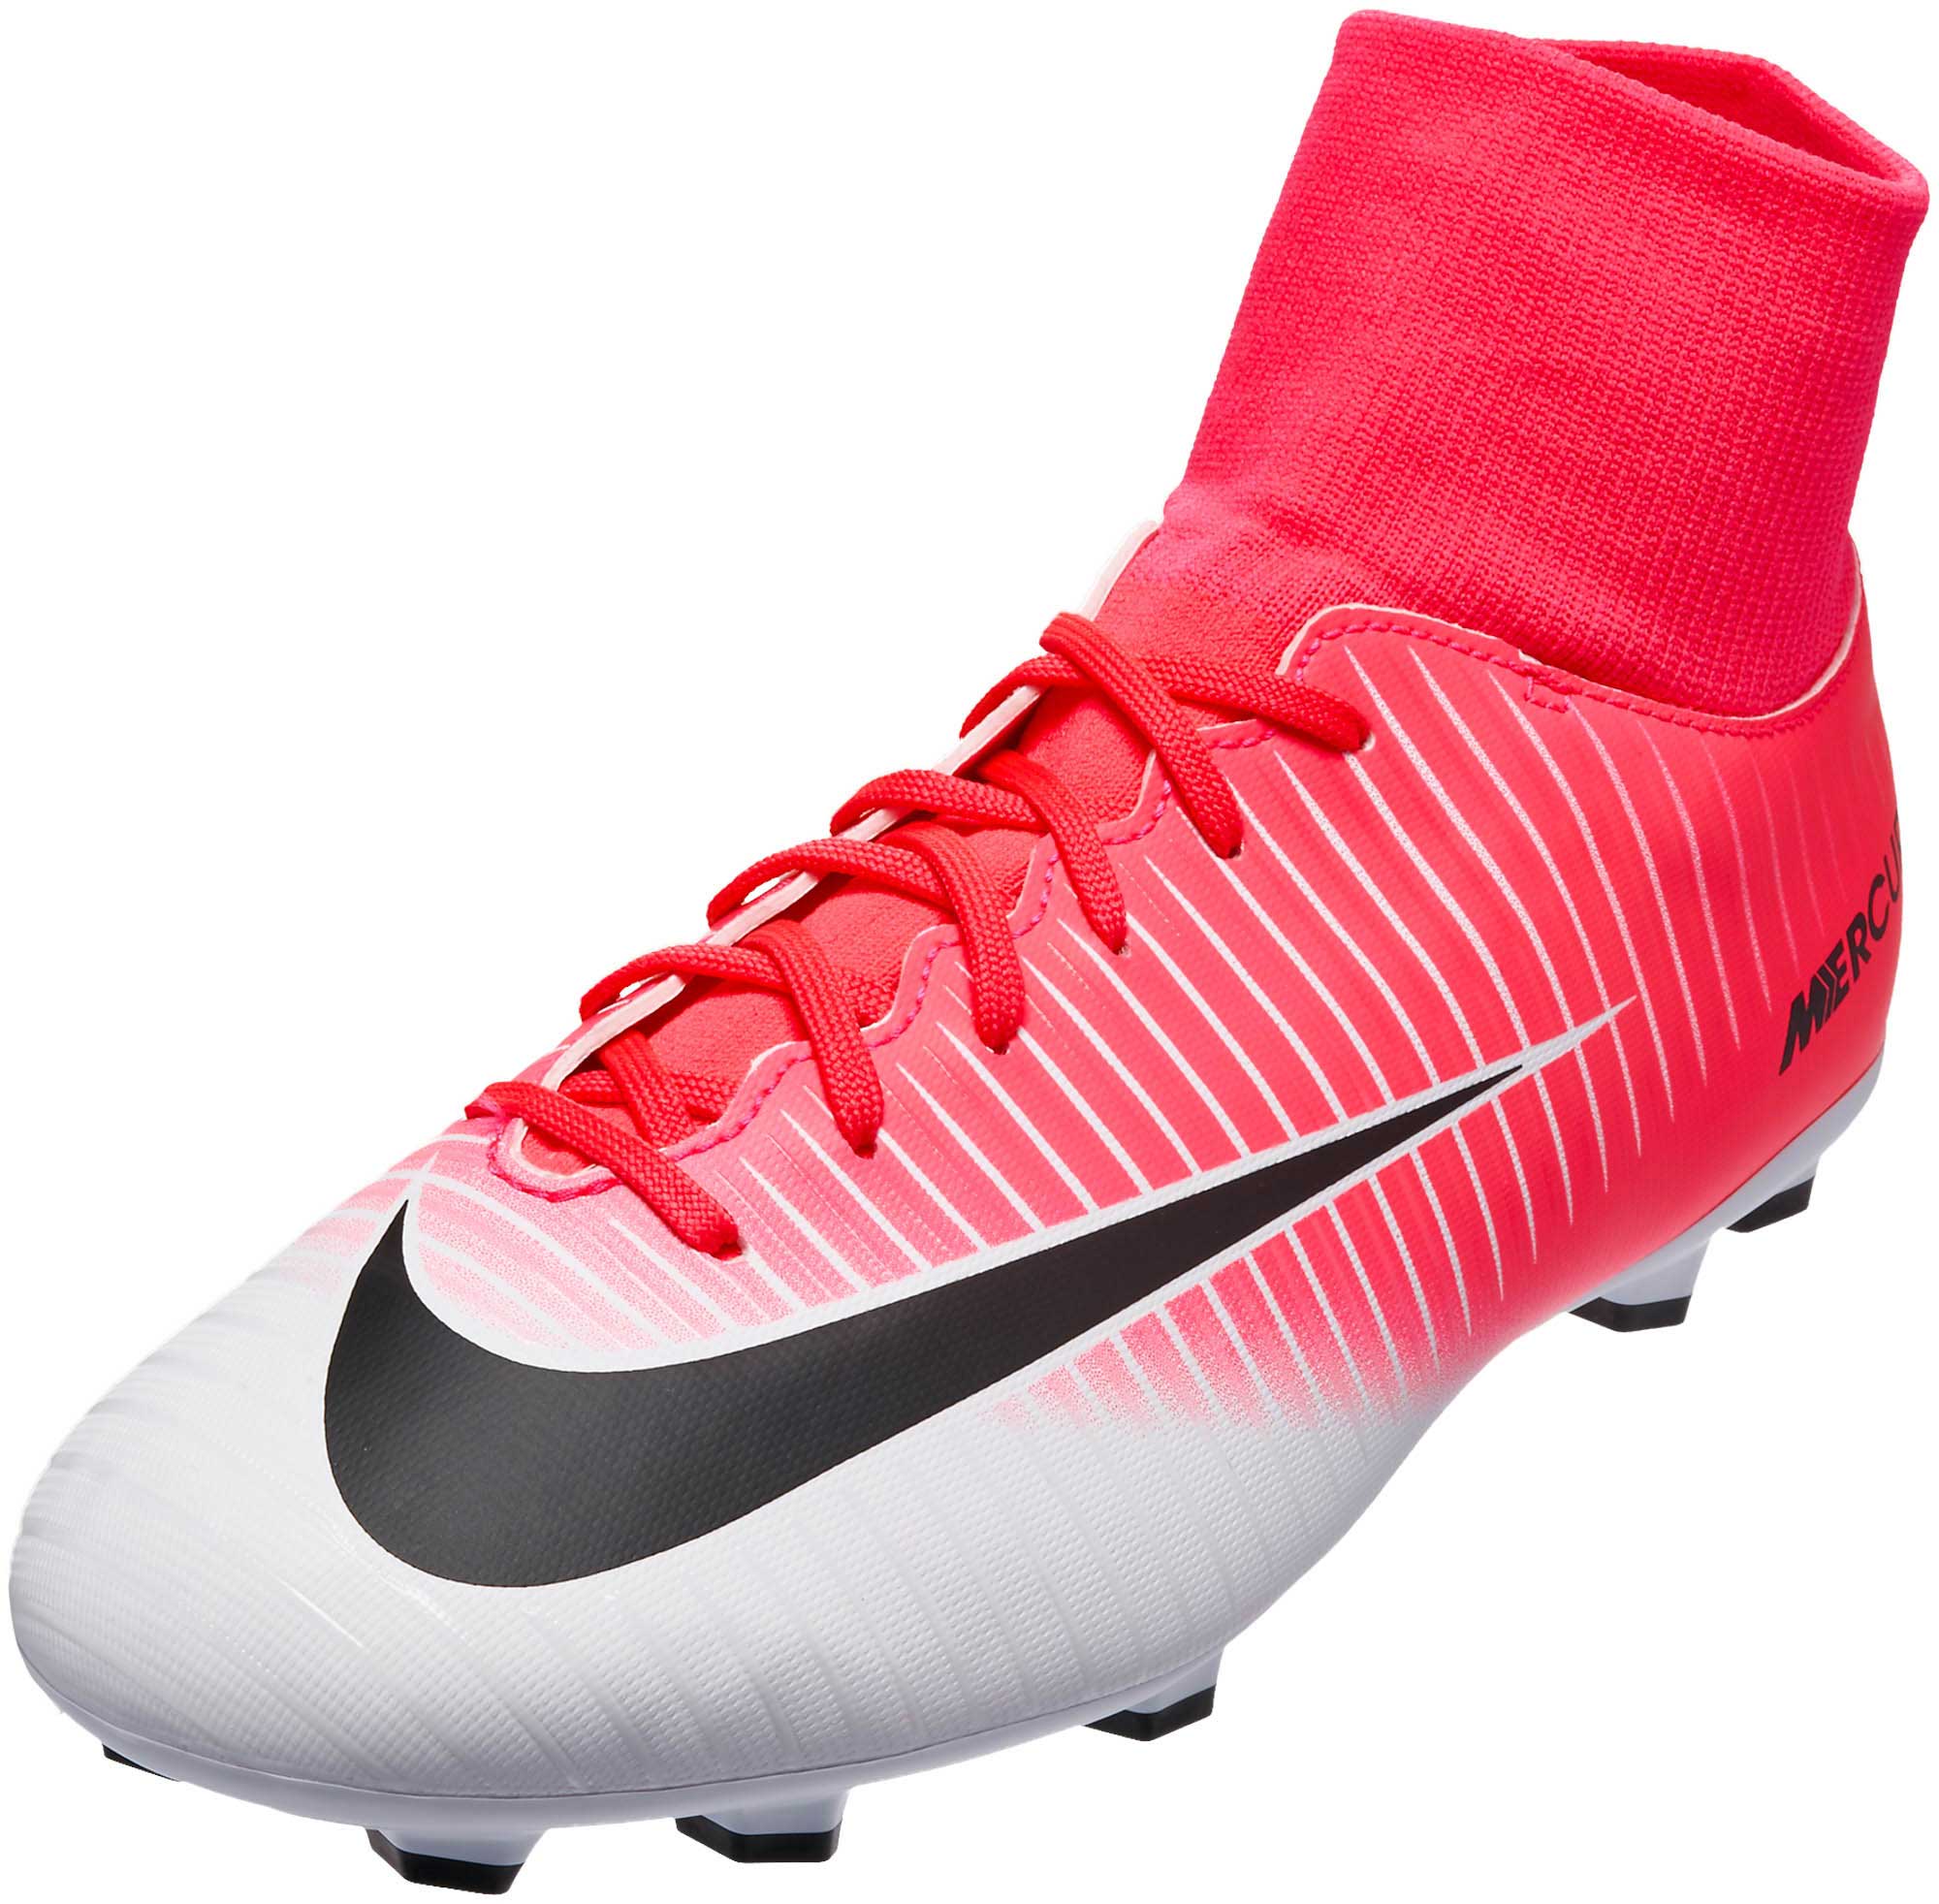 Collection 102+ Pictures Pictures Of Nike Soccer Cleats Full HD, 2k, 4k